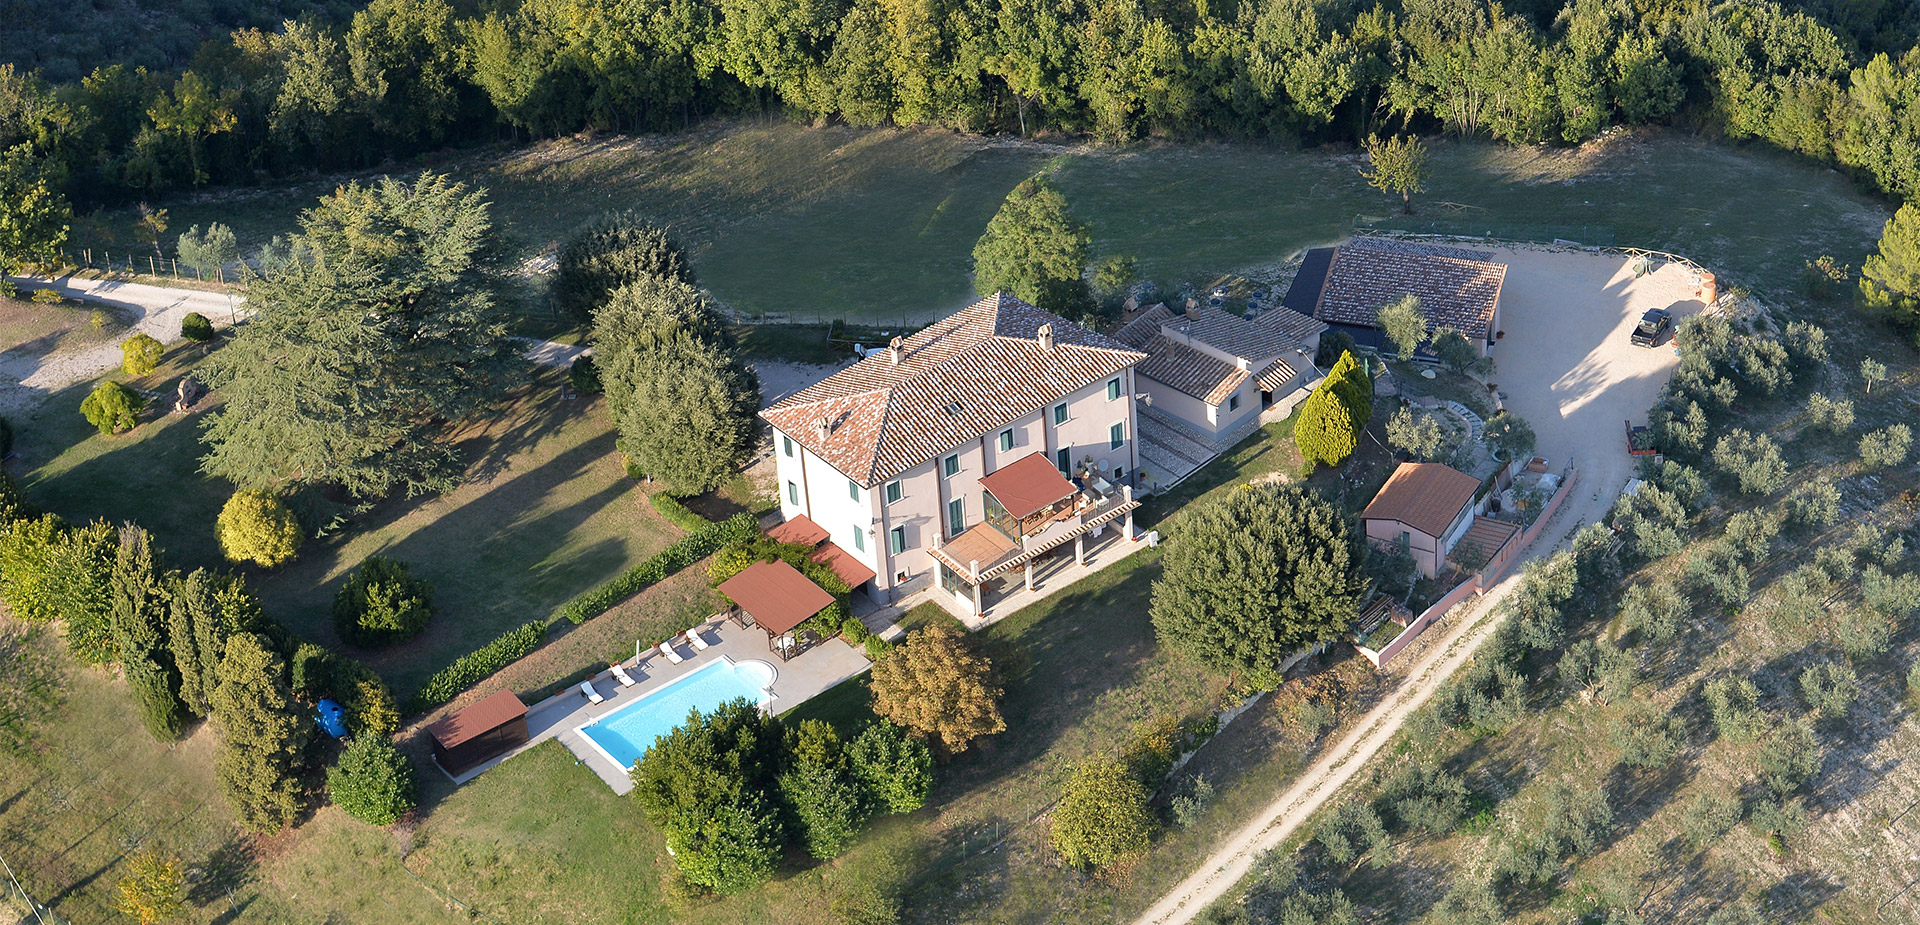 Holiday farm in the heart of umbria